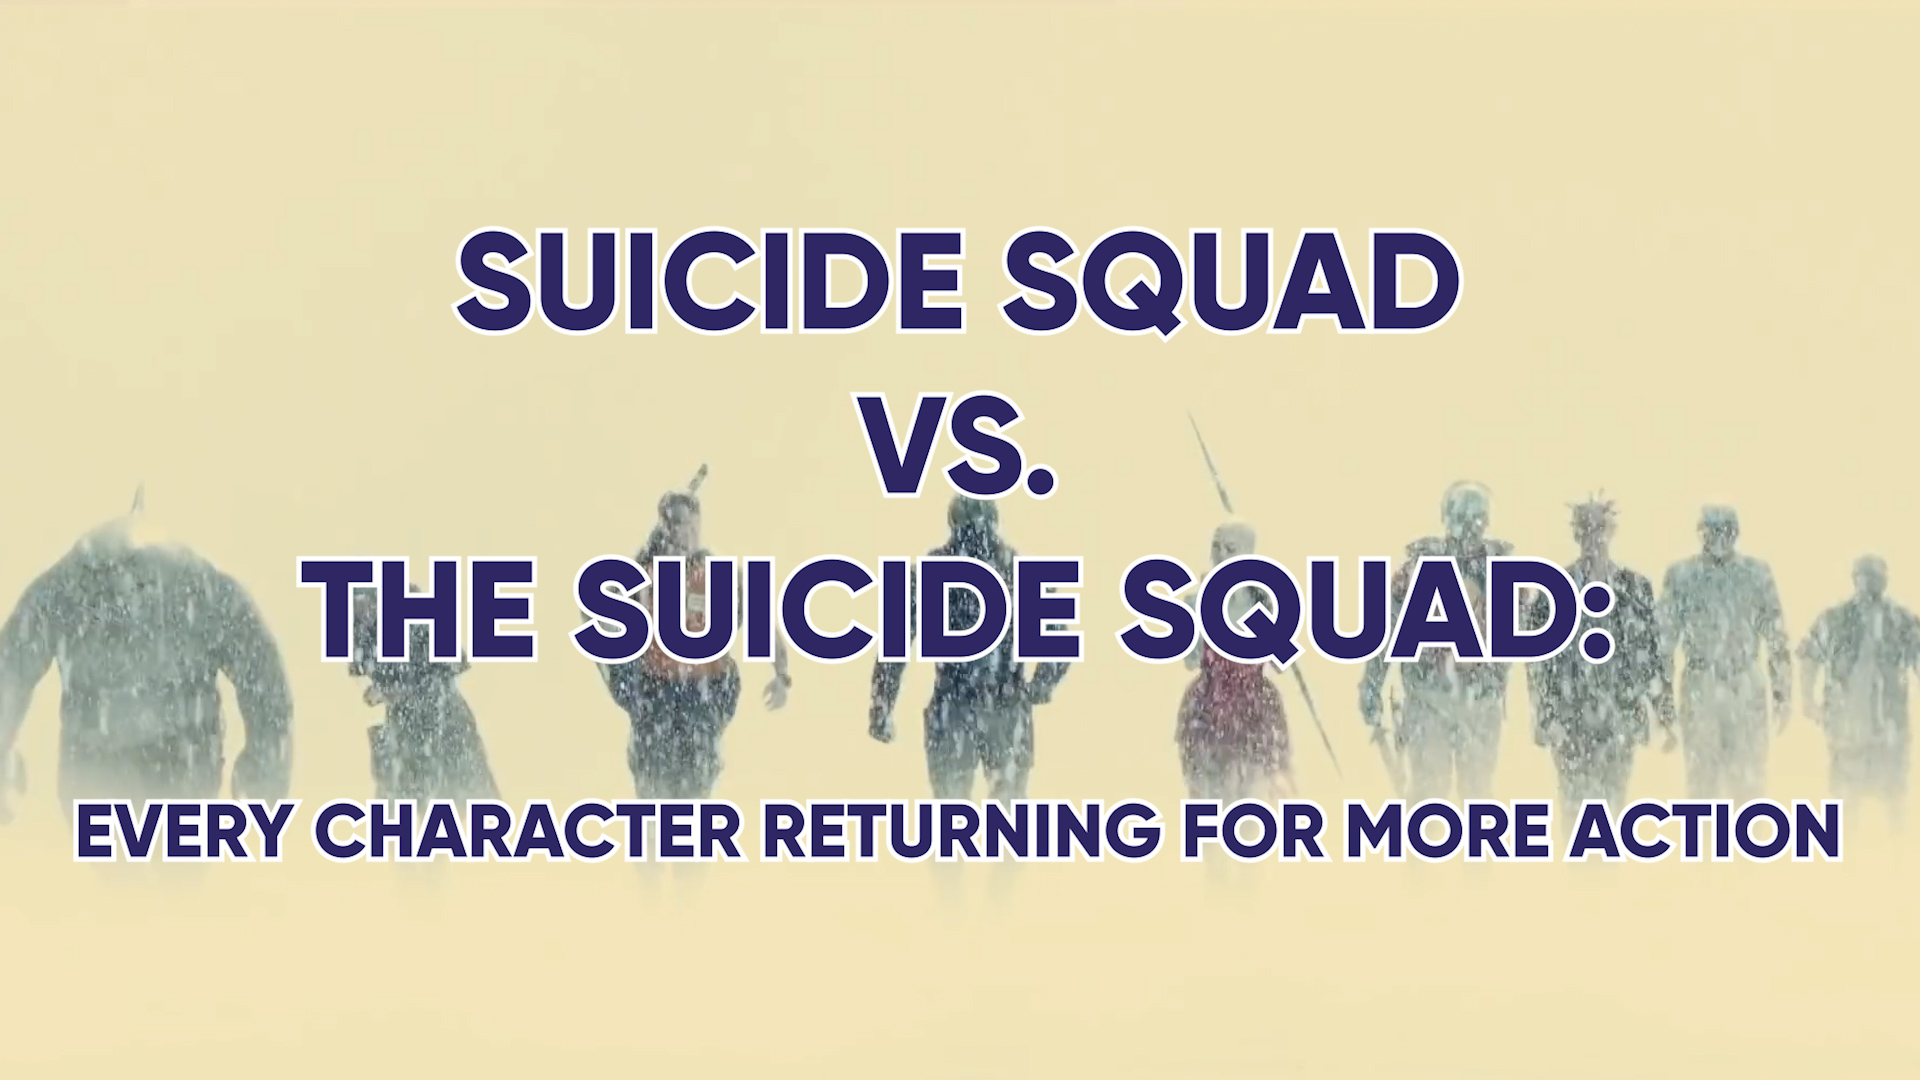 Suicide Squad Vs. The Suicide Squad: Every Character Returning